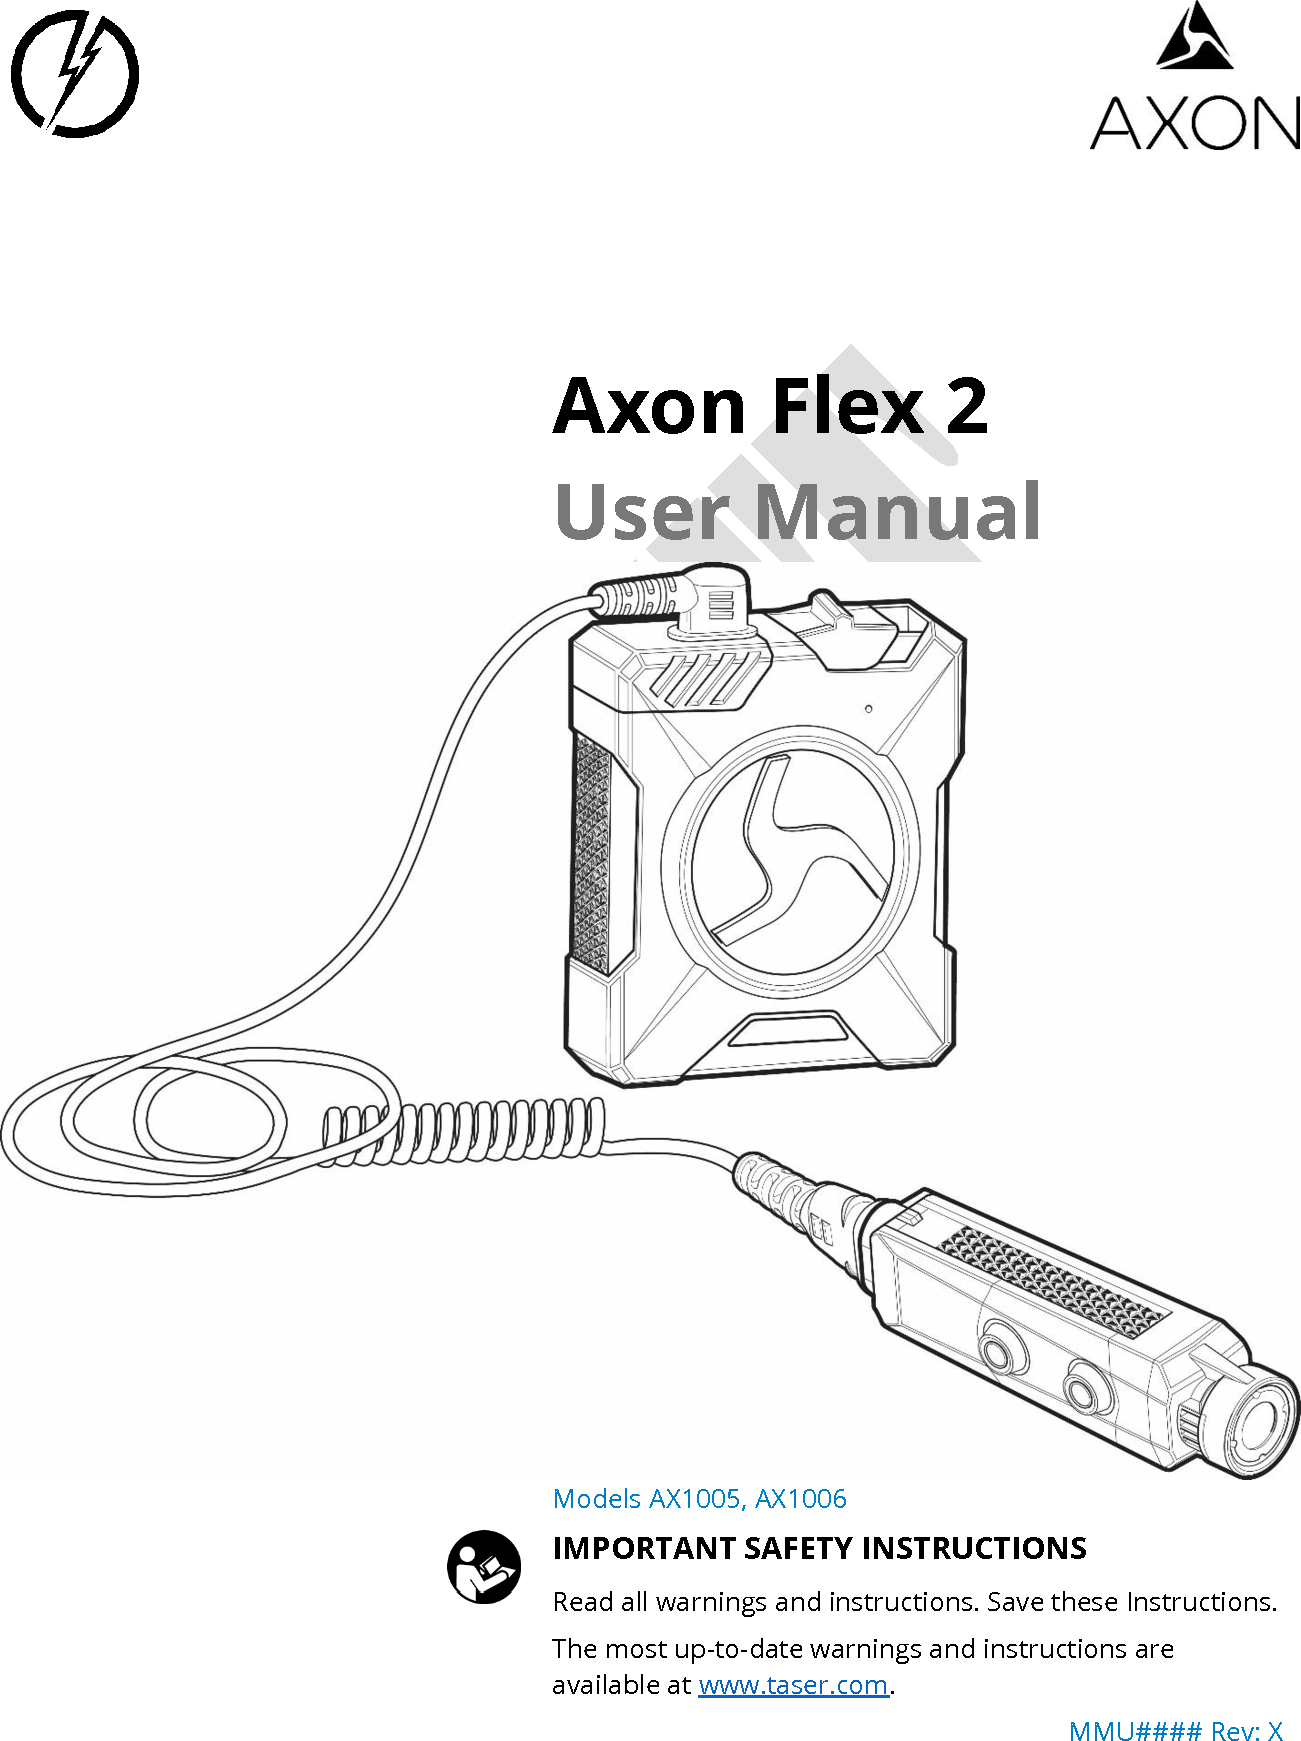      Axon Flex 2 User Manual   Models AX1005, AX1006 IMPORTANT SAFETY INSTRUCTIONS Read all warnings and instructions. Save these Instructions. The most up-to-date warnings and instructions are available at www.taser.com. MMU#### Rev: X 